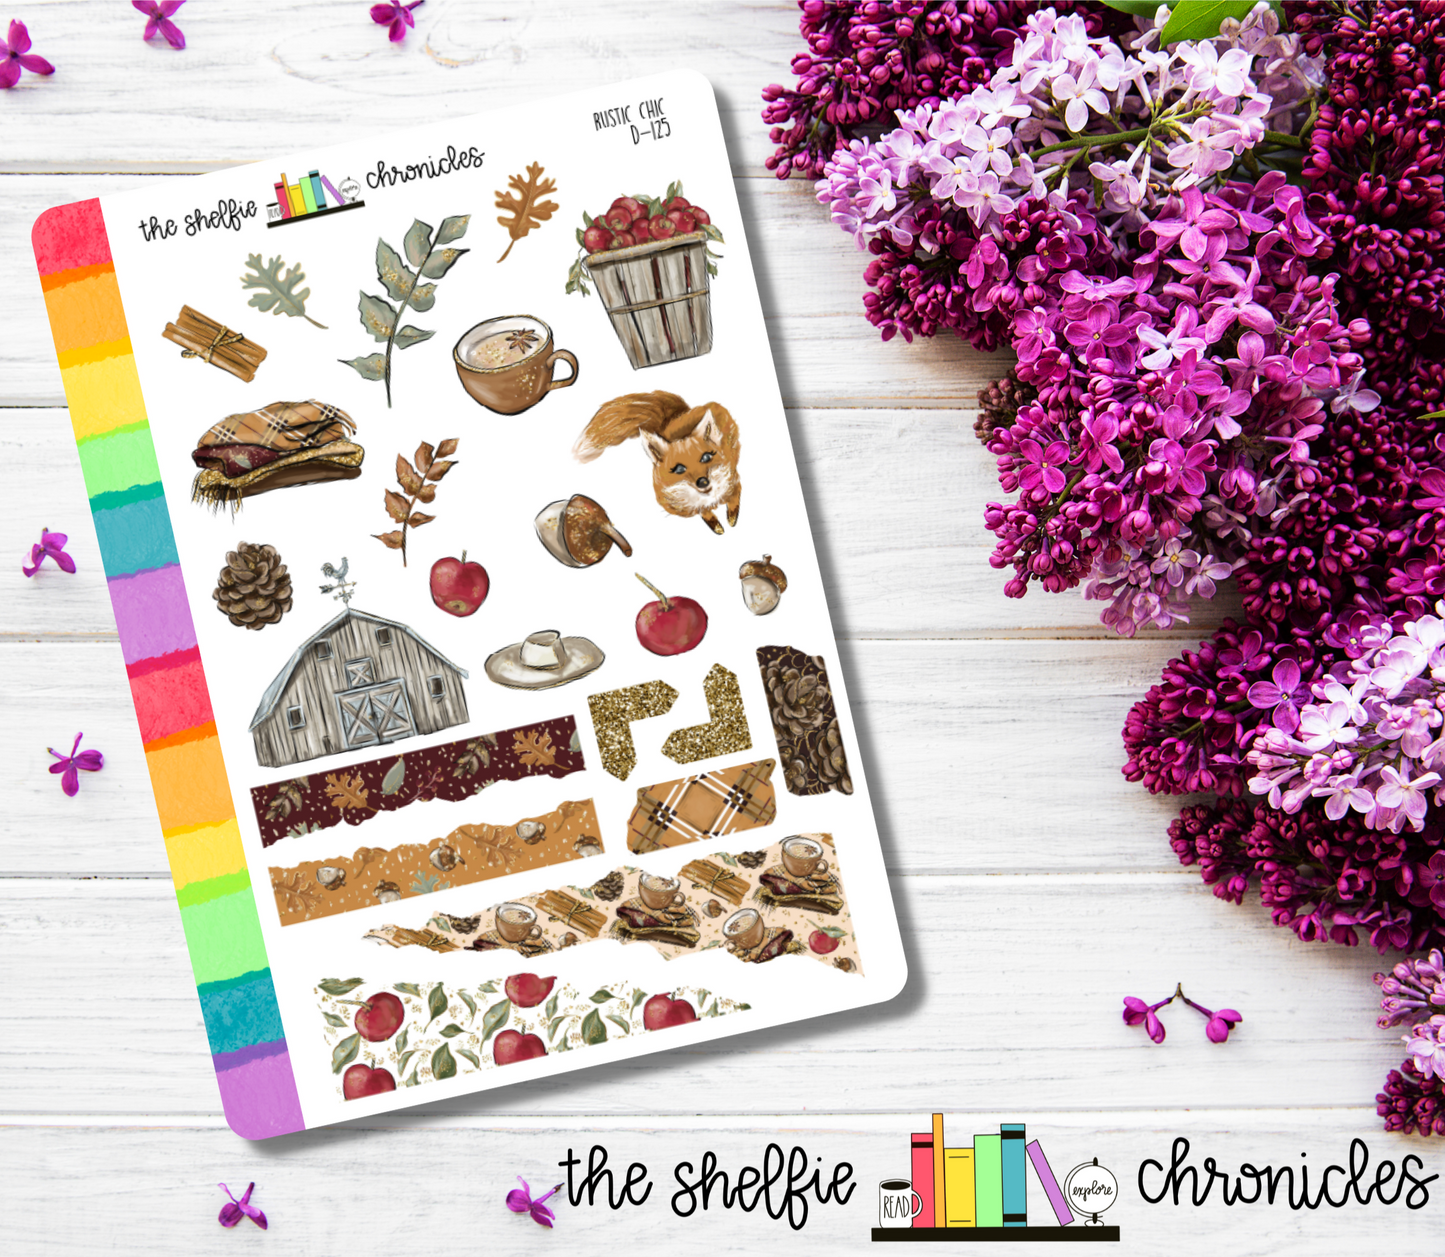 D 125 - Rustic Chic - Die Cut Stickers - Repositionable Paper - Perfect For Reading Journals And Planners